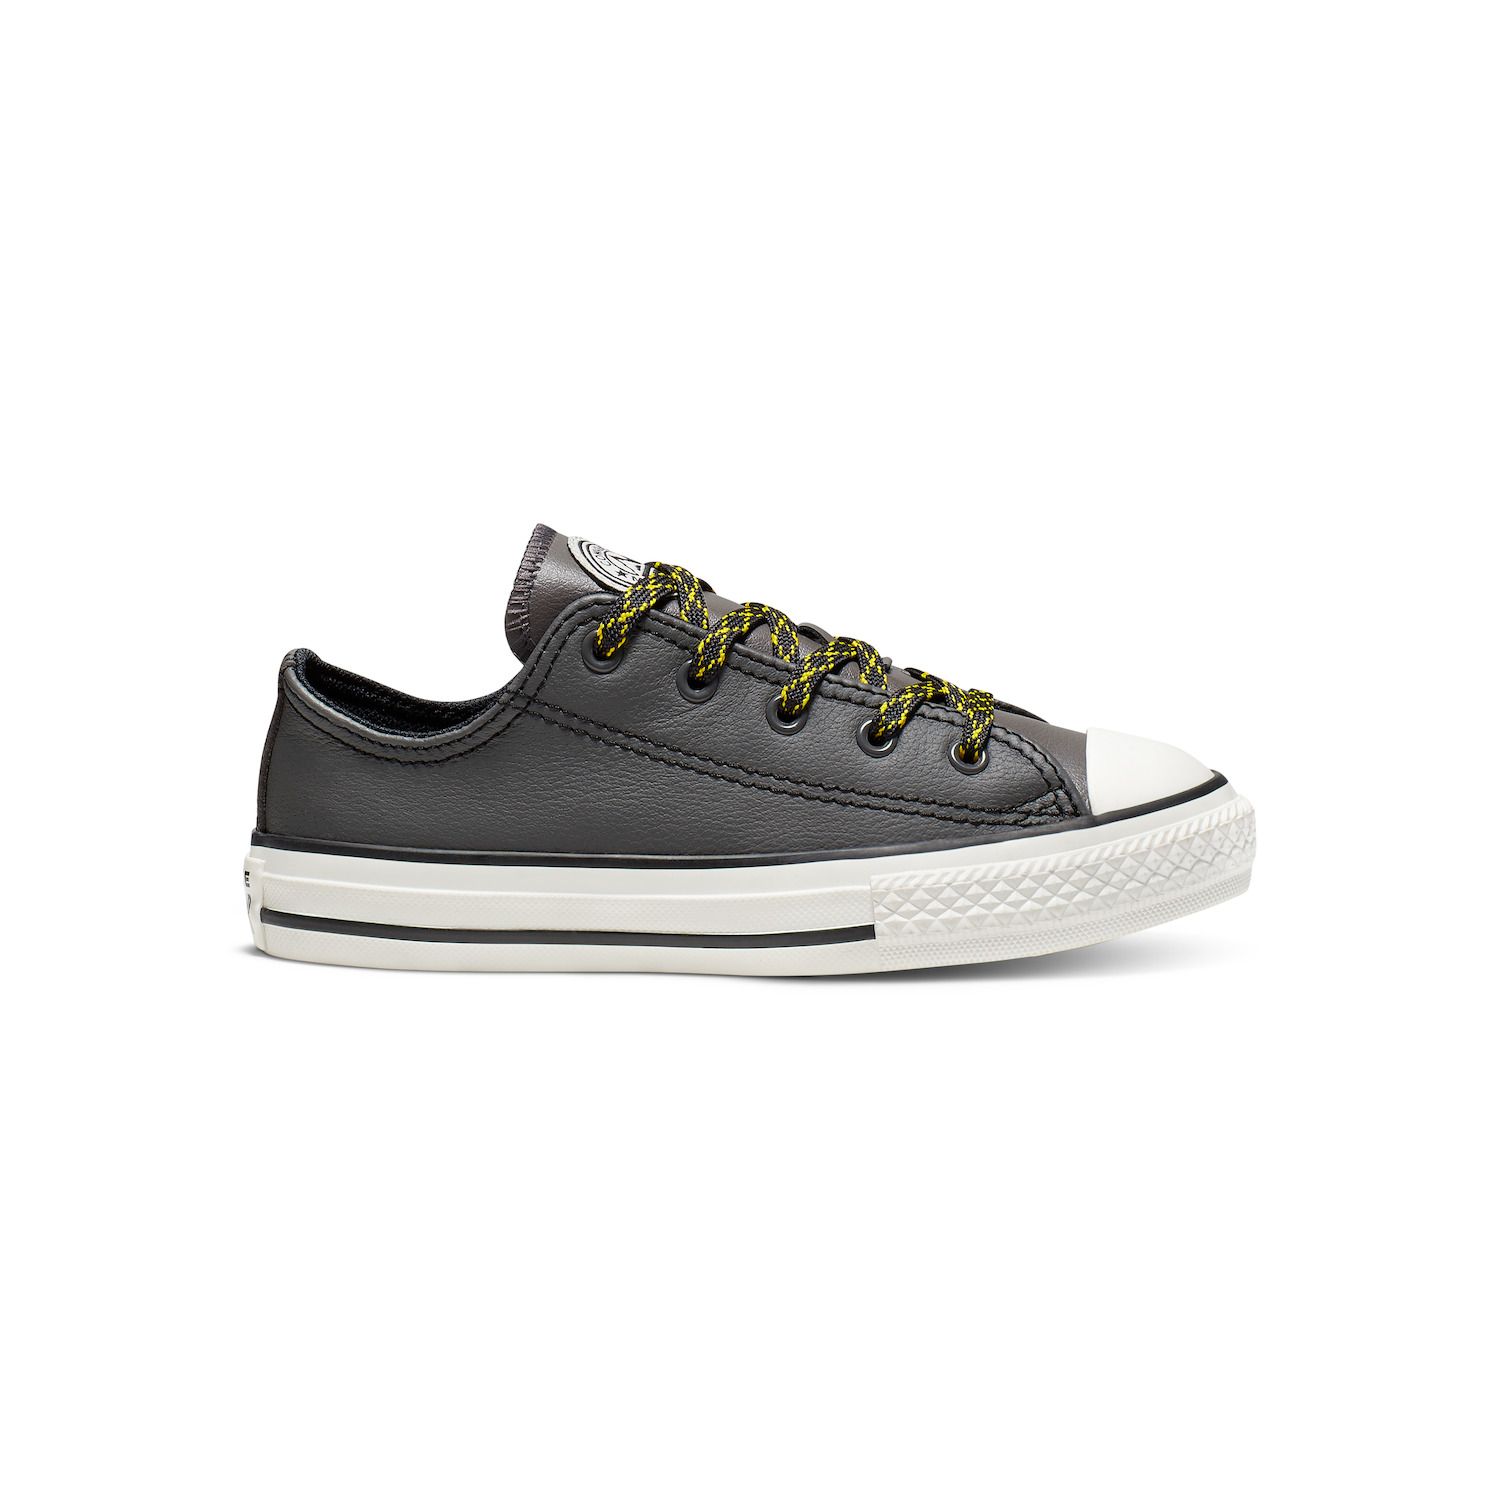 converse chuck taylor all star tumbled leather ox